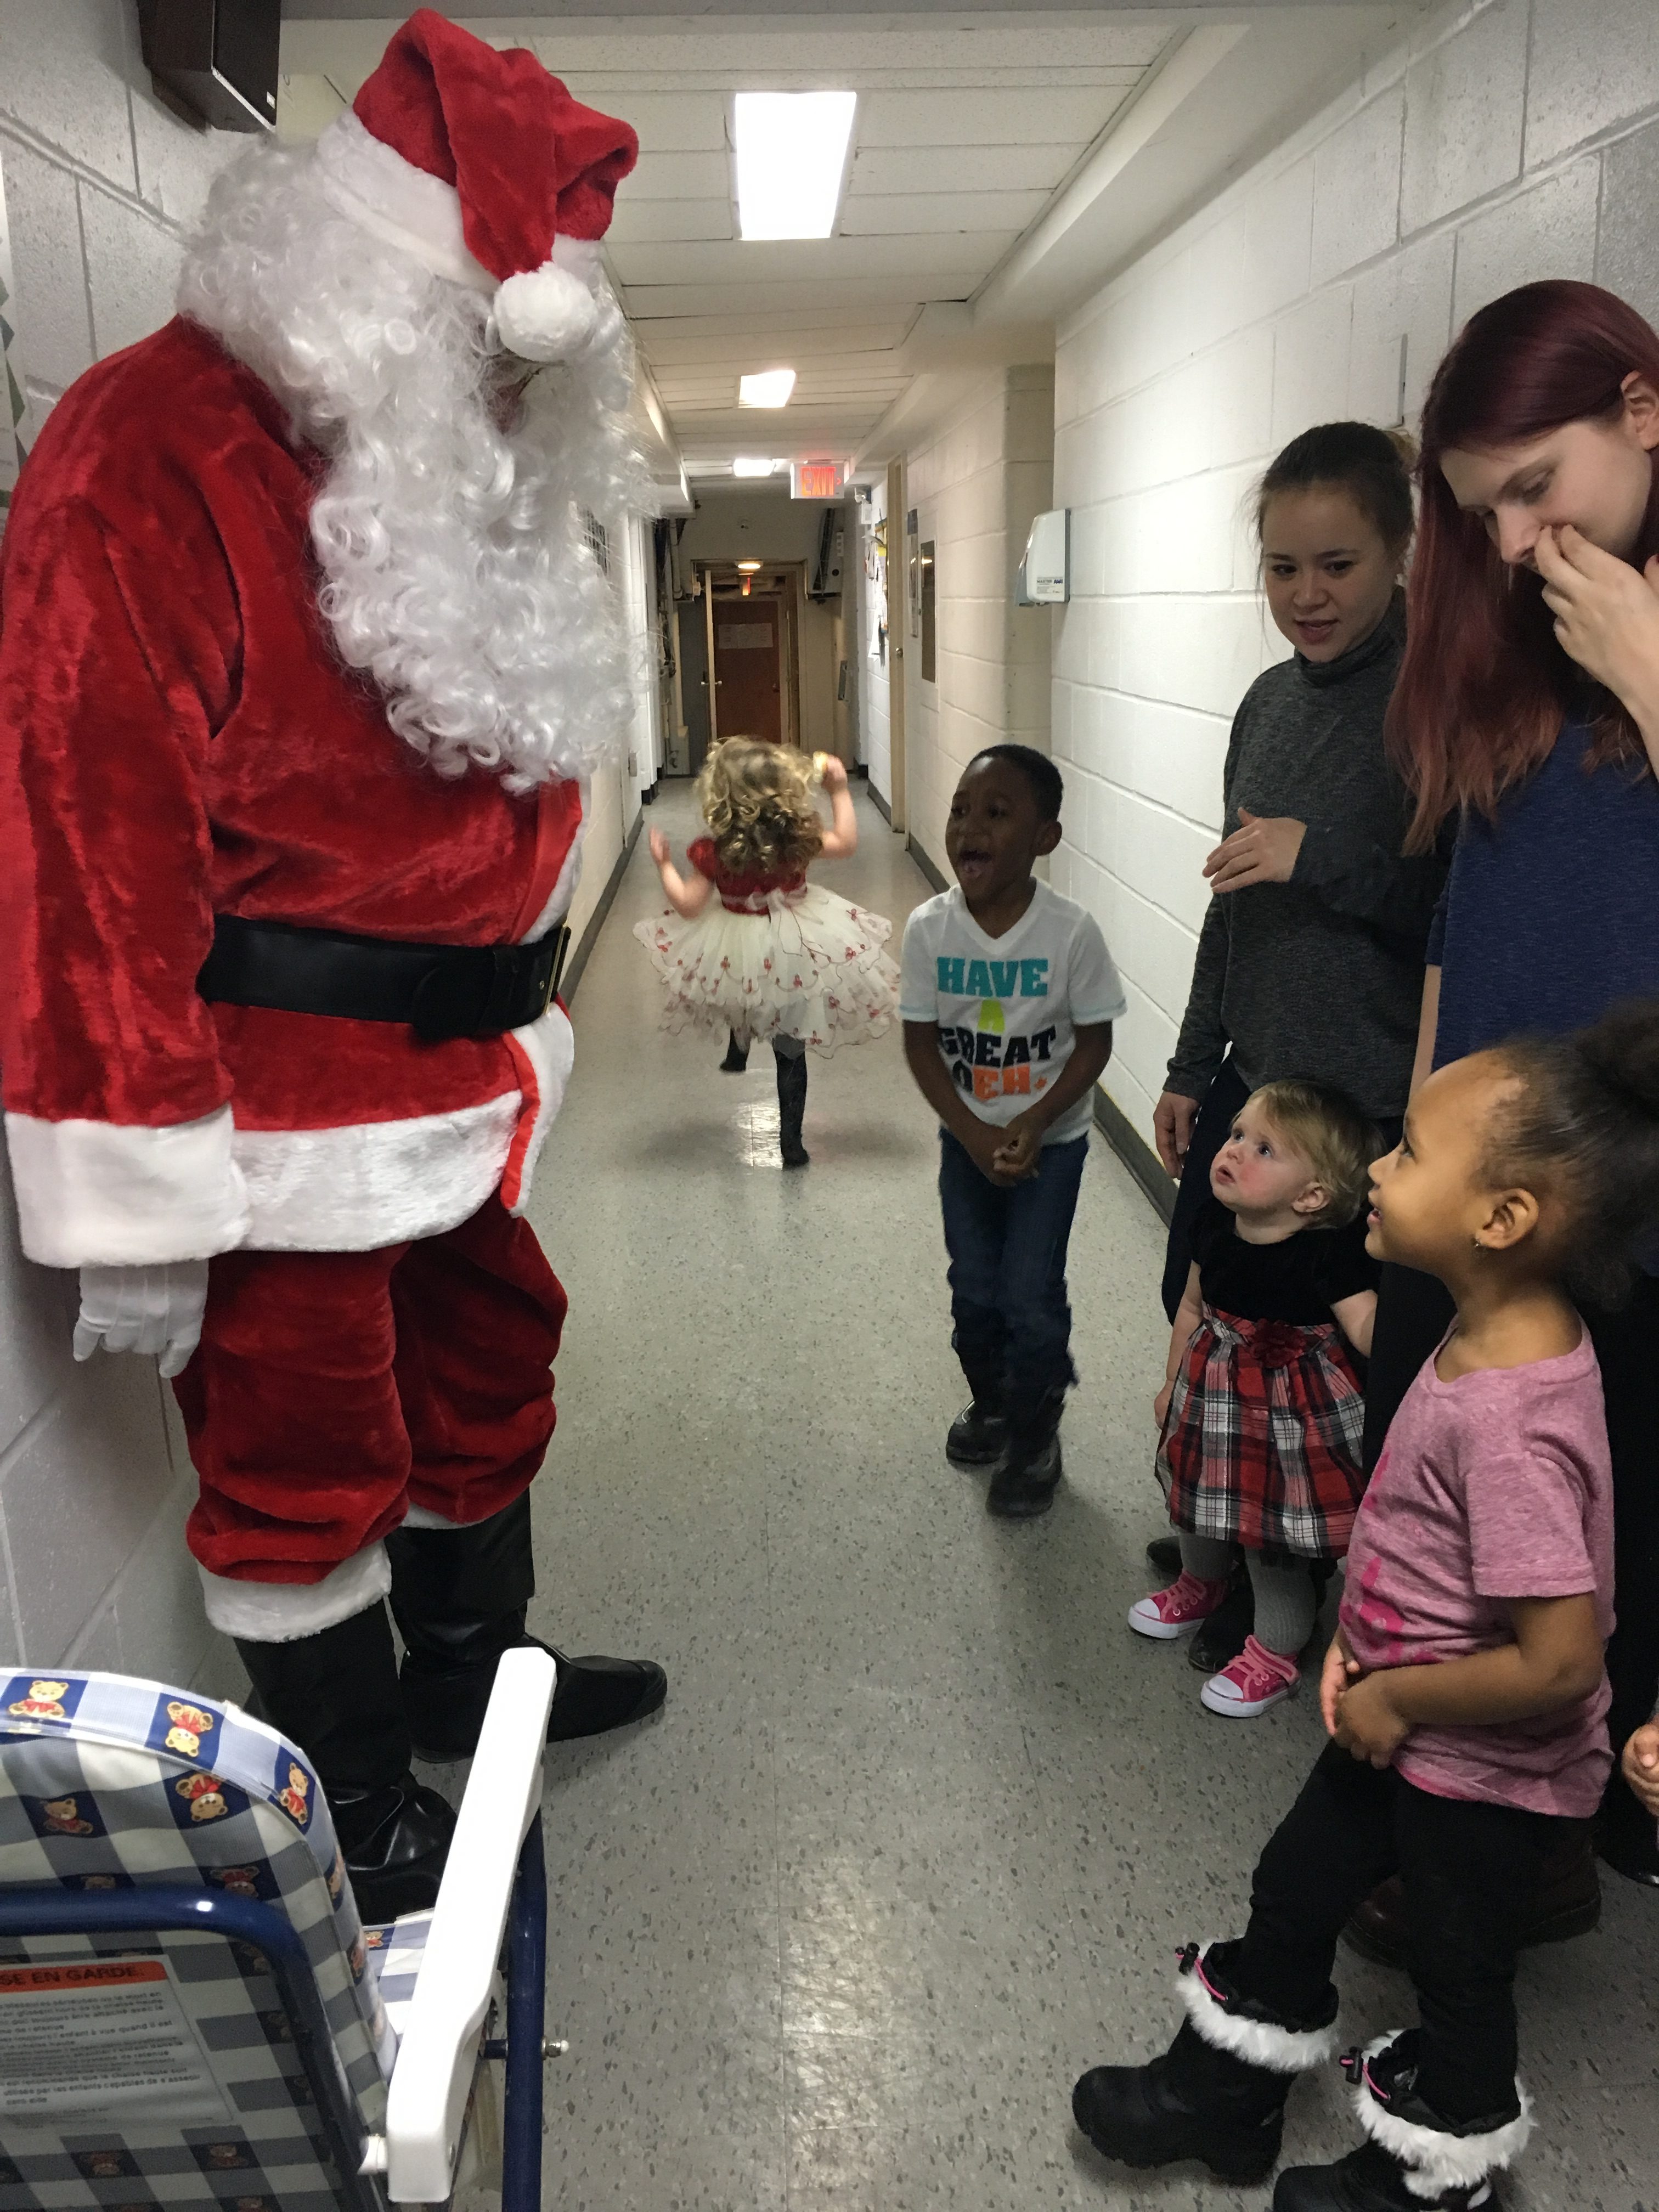 Santa meets with some young moms and children in the hall.